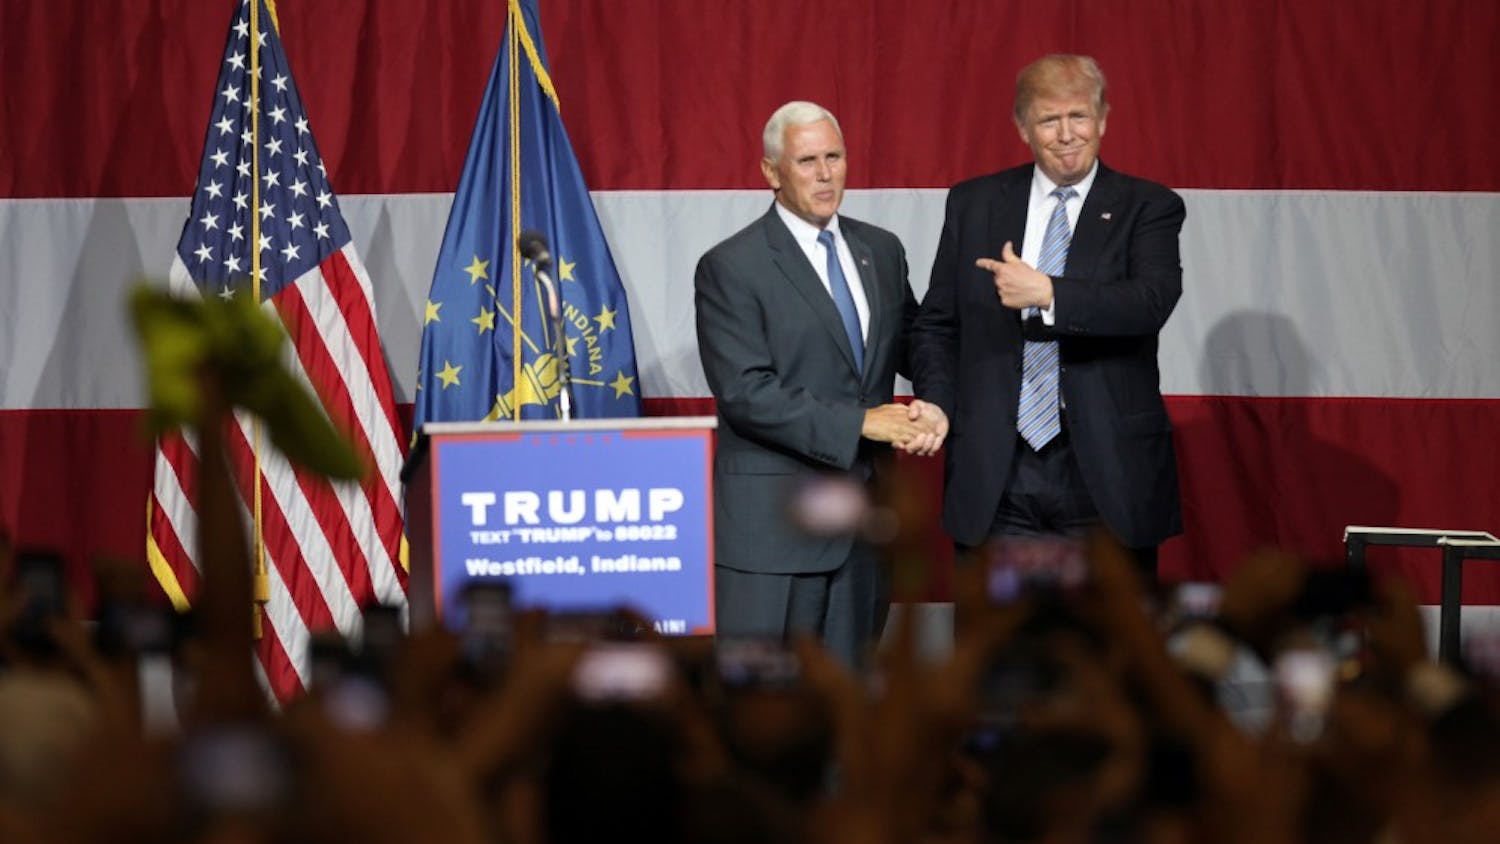 Governor Mike Pence and Republican Presidential Candidate Donald Trump address the crowd after Pence introuces Trump to the stage during a Trump rally in Westfield, Ind. on Tuesday evening.